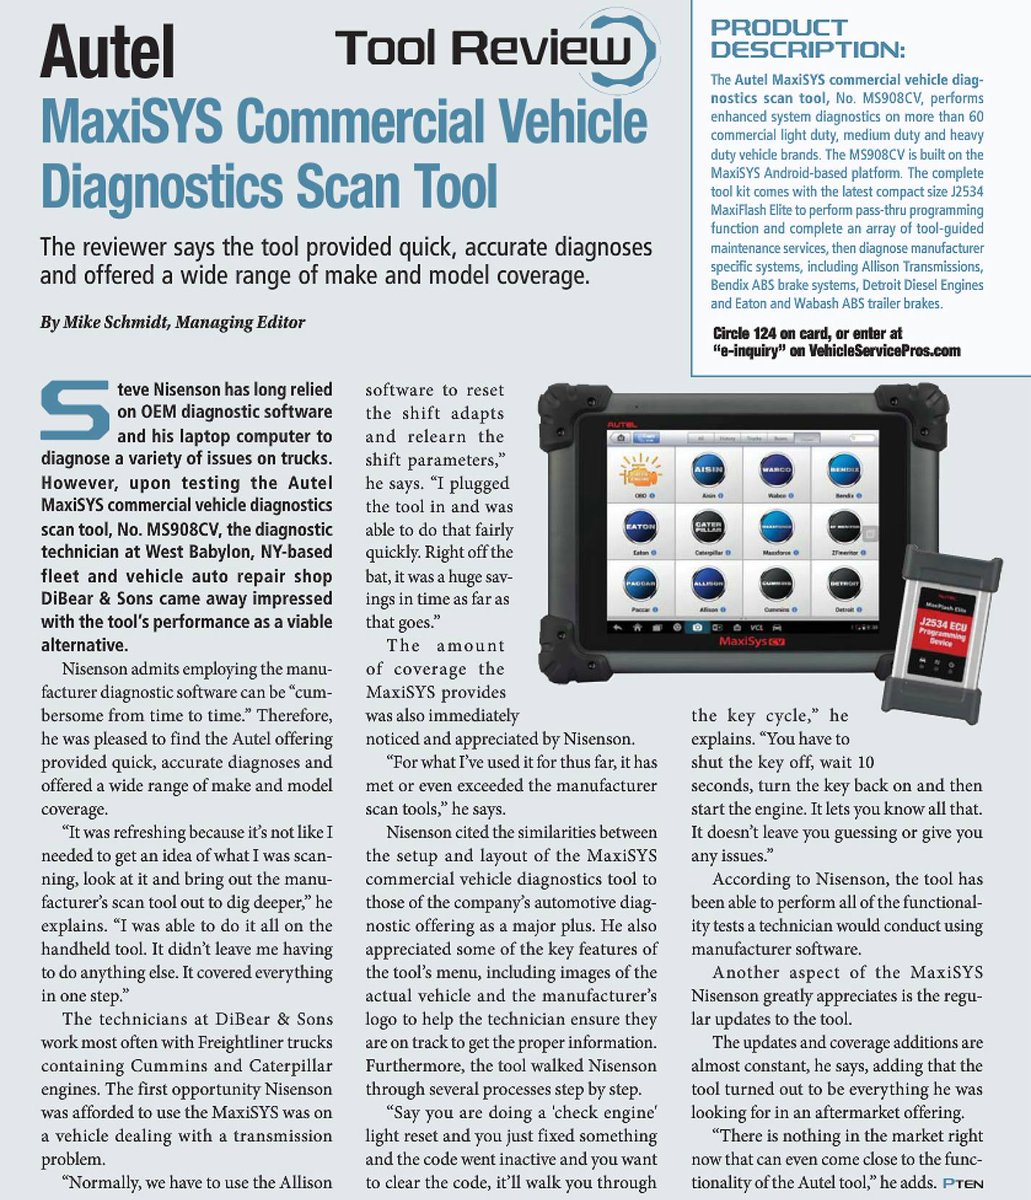 Thank you @PTENmagazine & Professional Distributor for sharing your interview/review with DiBear&Sons of our MS908CV scan tool!